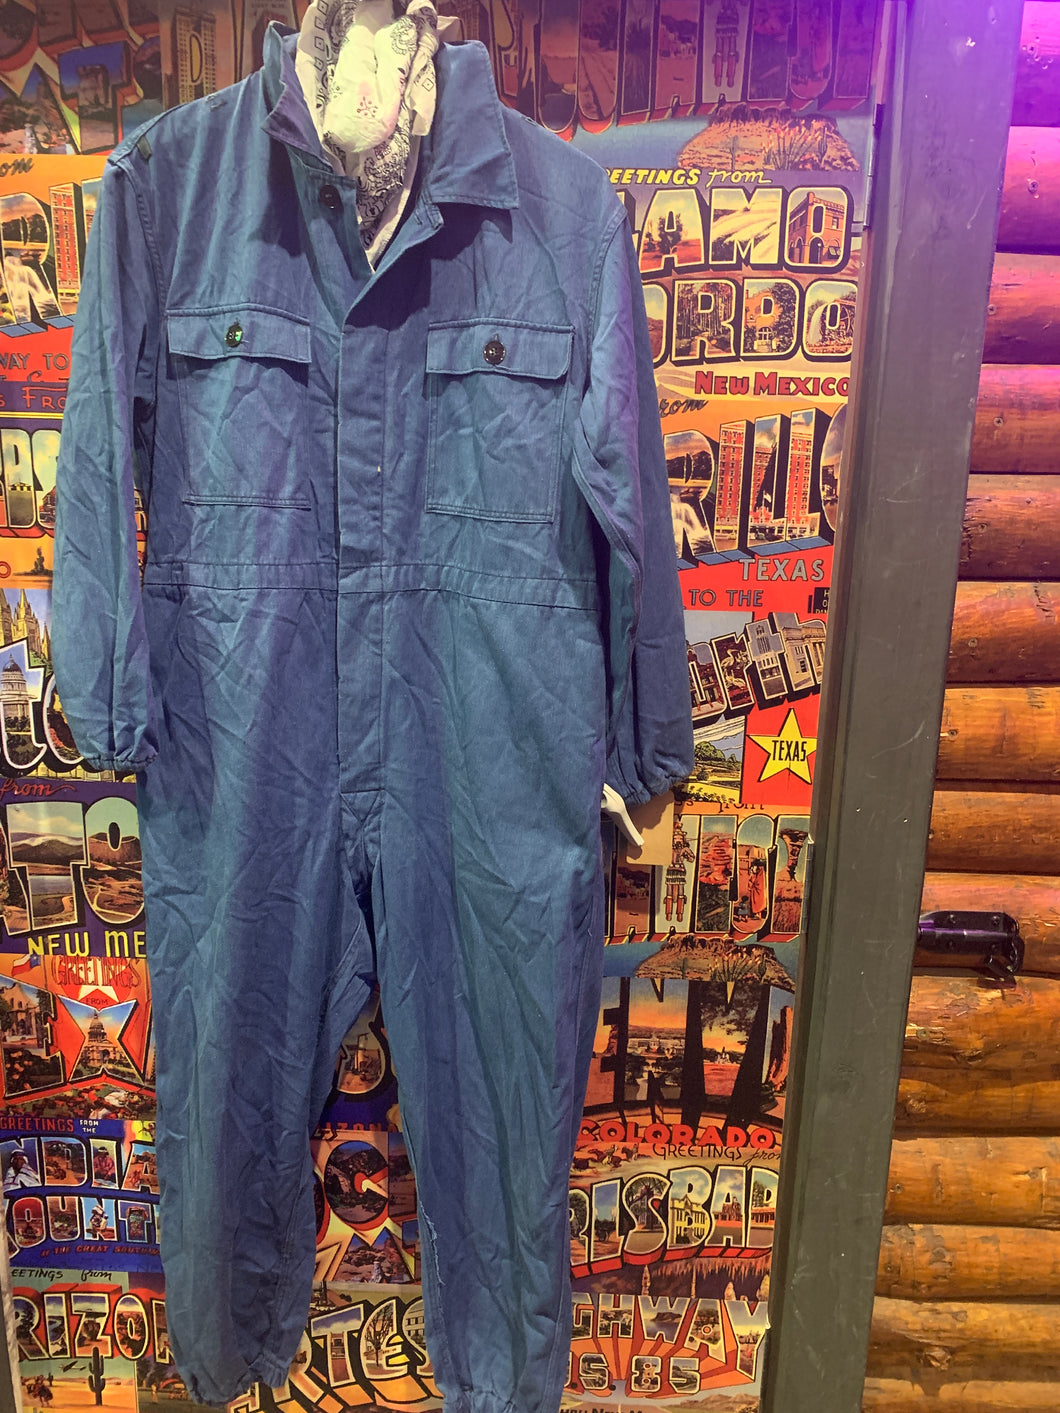 Vintage French Workwear Coveralls, Waist 38-40. FREE POSTAGE